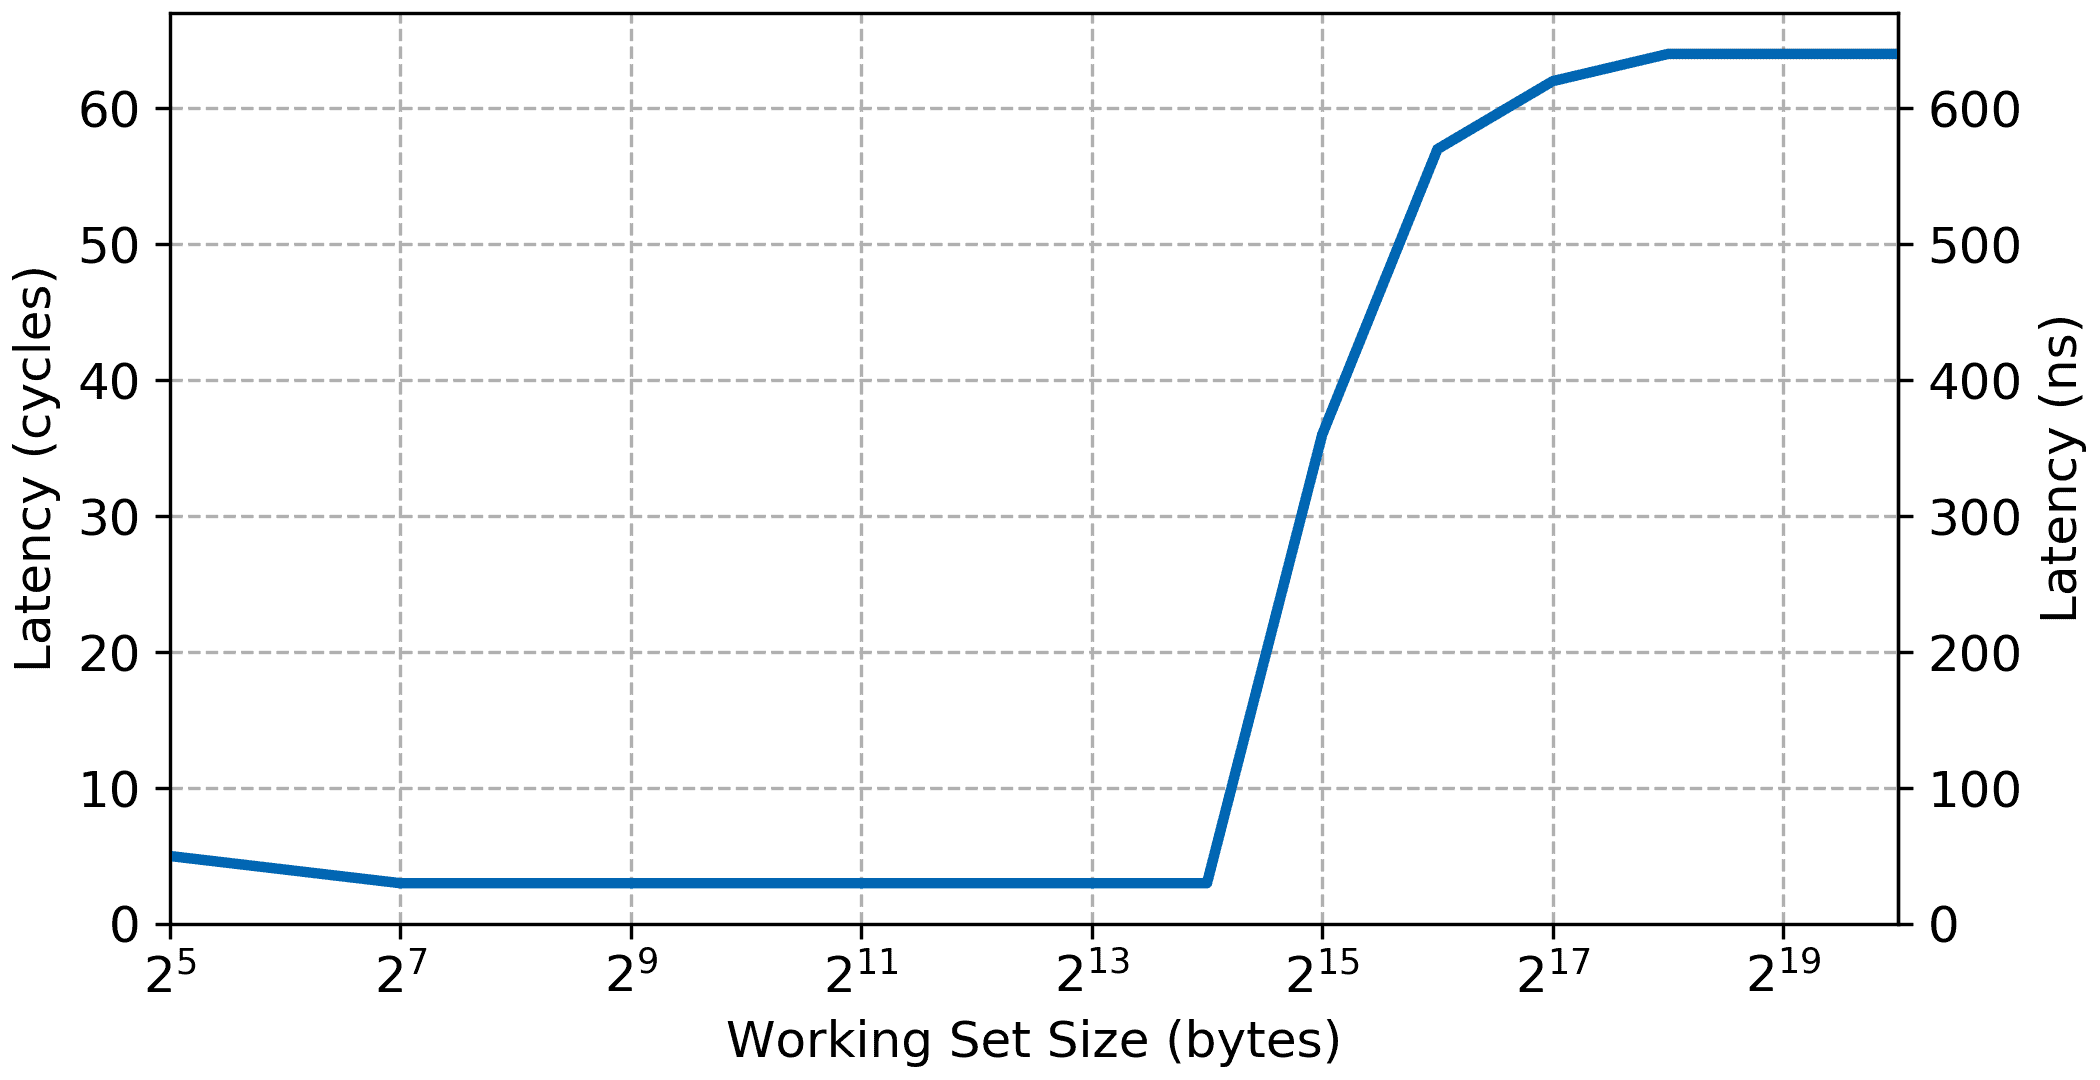 Plot of the Microblaze memory read access latency versus the working set size when running from external DDR SDRAM memory with 16KiB of level 1 cache.